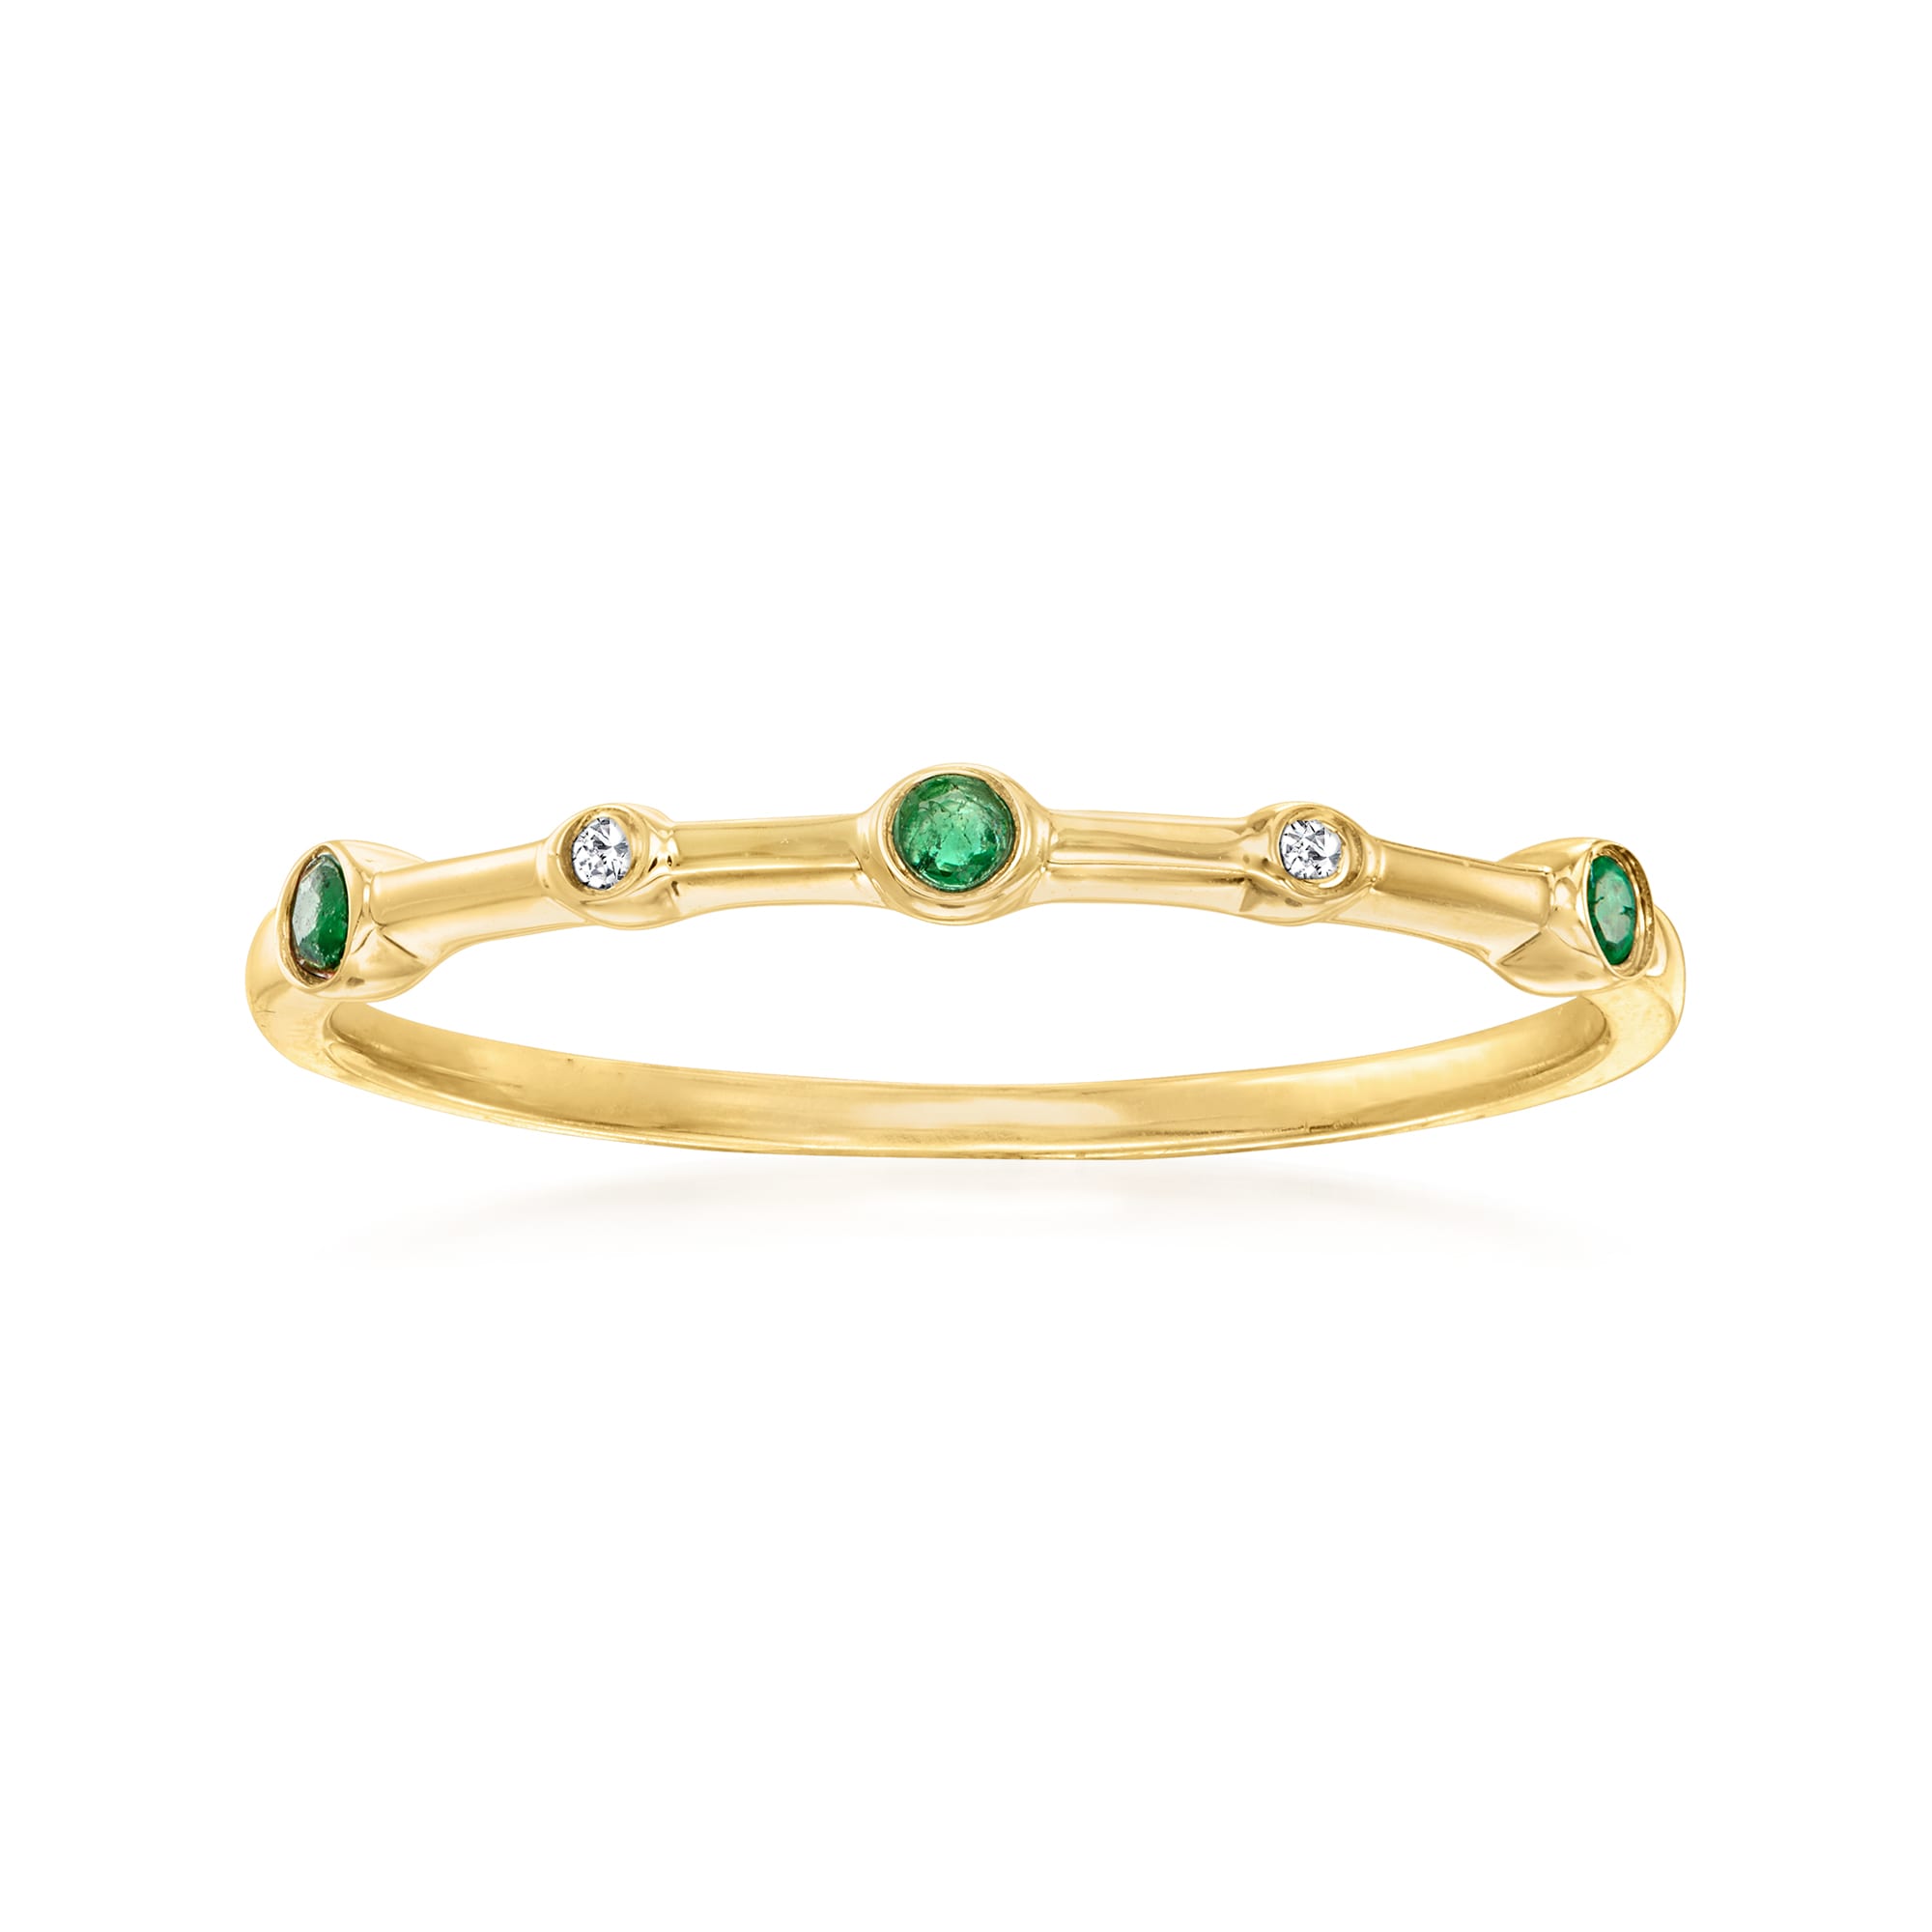 Emerald- and Diamond-Accented Ring 14kt Yellow Gold | Ross-Simons